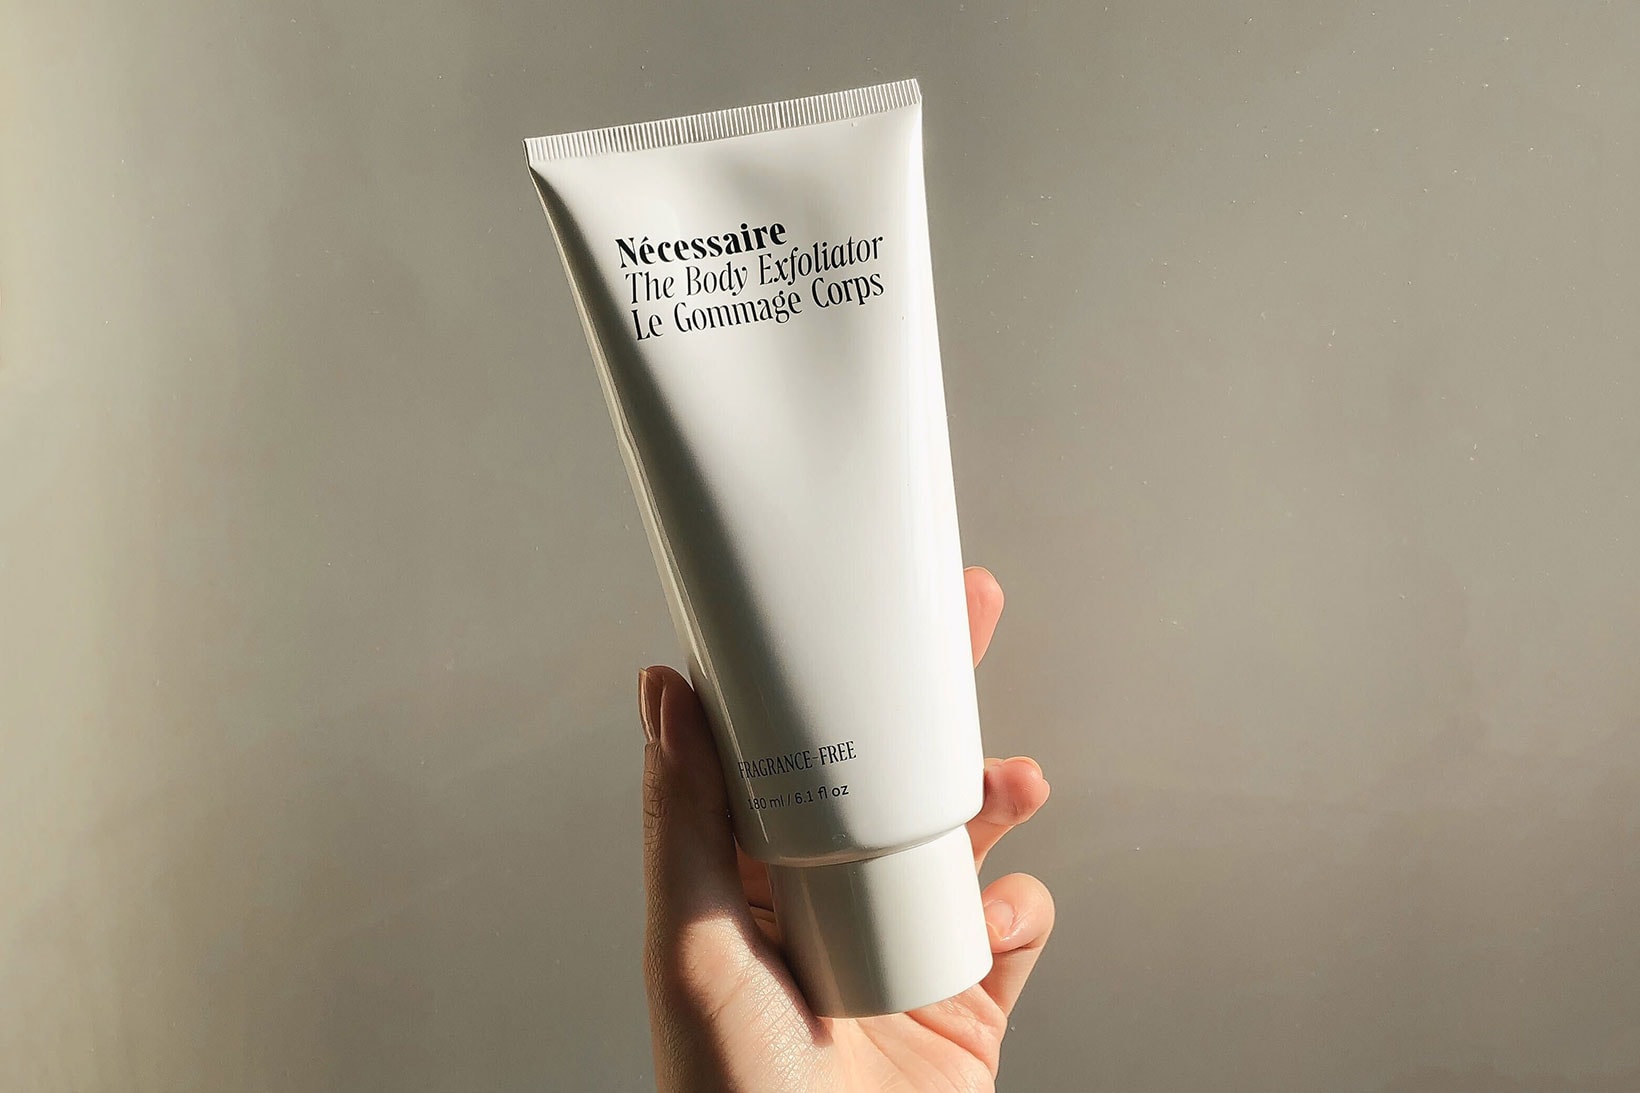 necessaire the body exfoliator with bamboo charcoal skincare